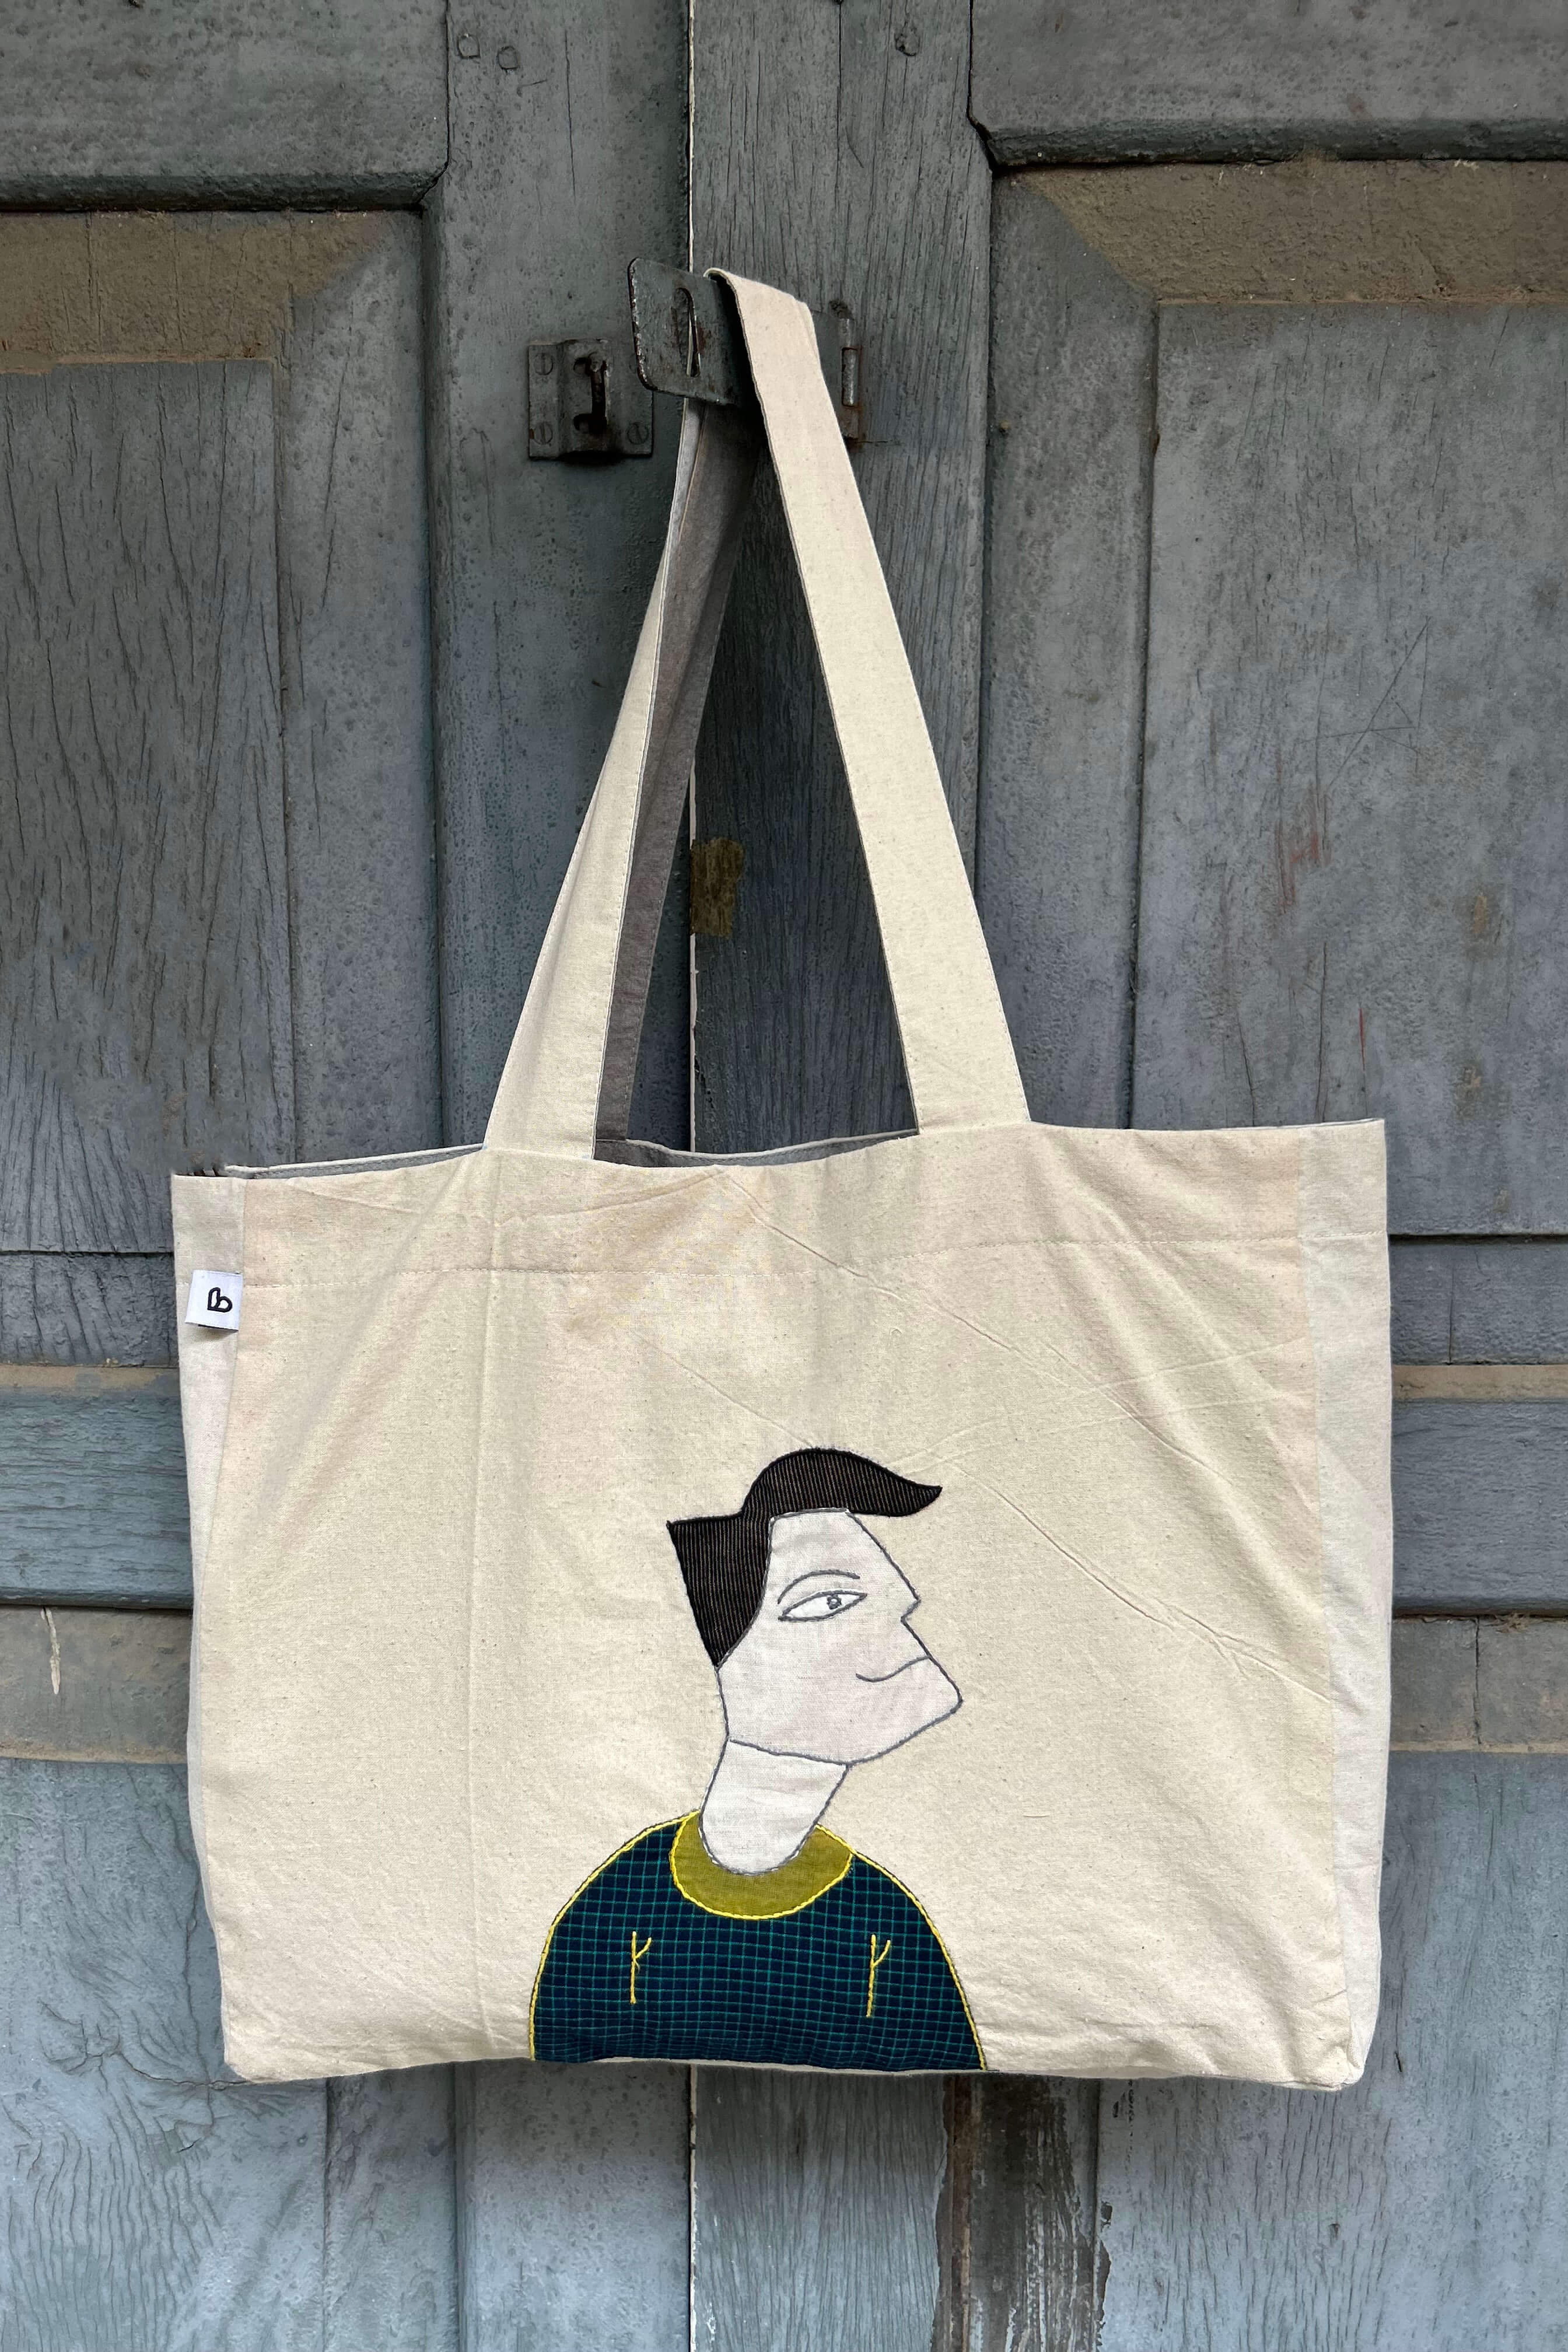 The Jawline Man- Hand Applique Tote Bag